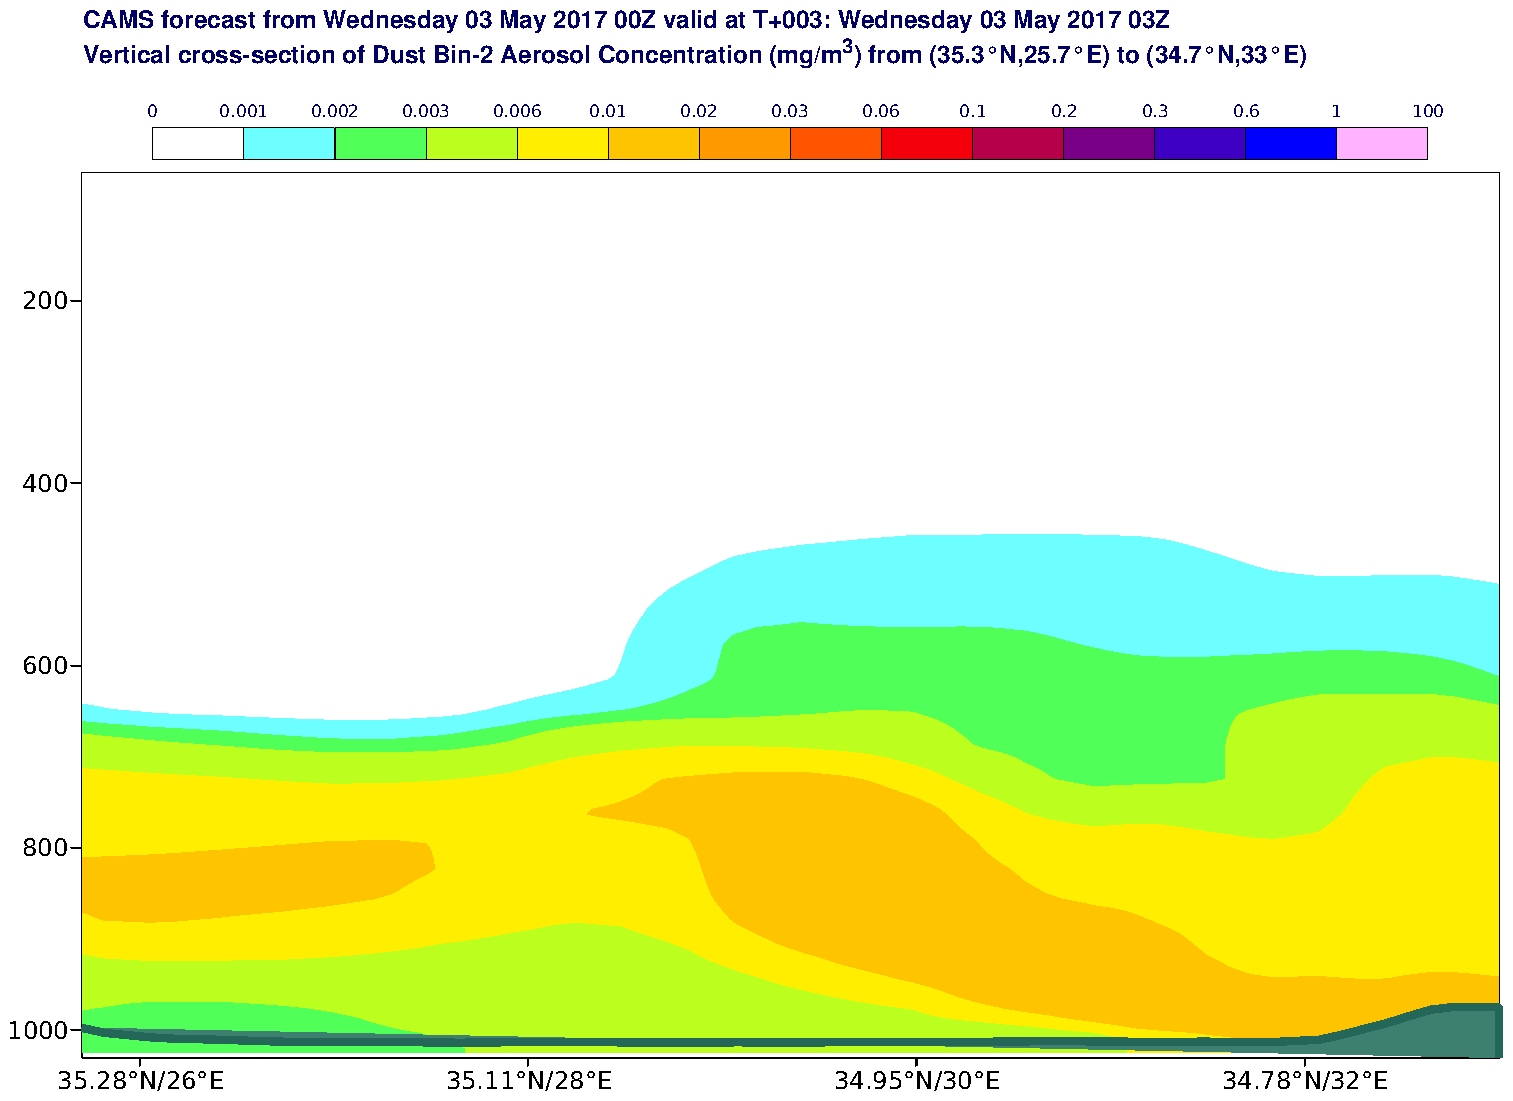 Vertical cross-section of Dust Bin-2 Aerosol Concentration (mg/m3) valid at T3 - 2017-05-03 03:00